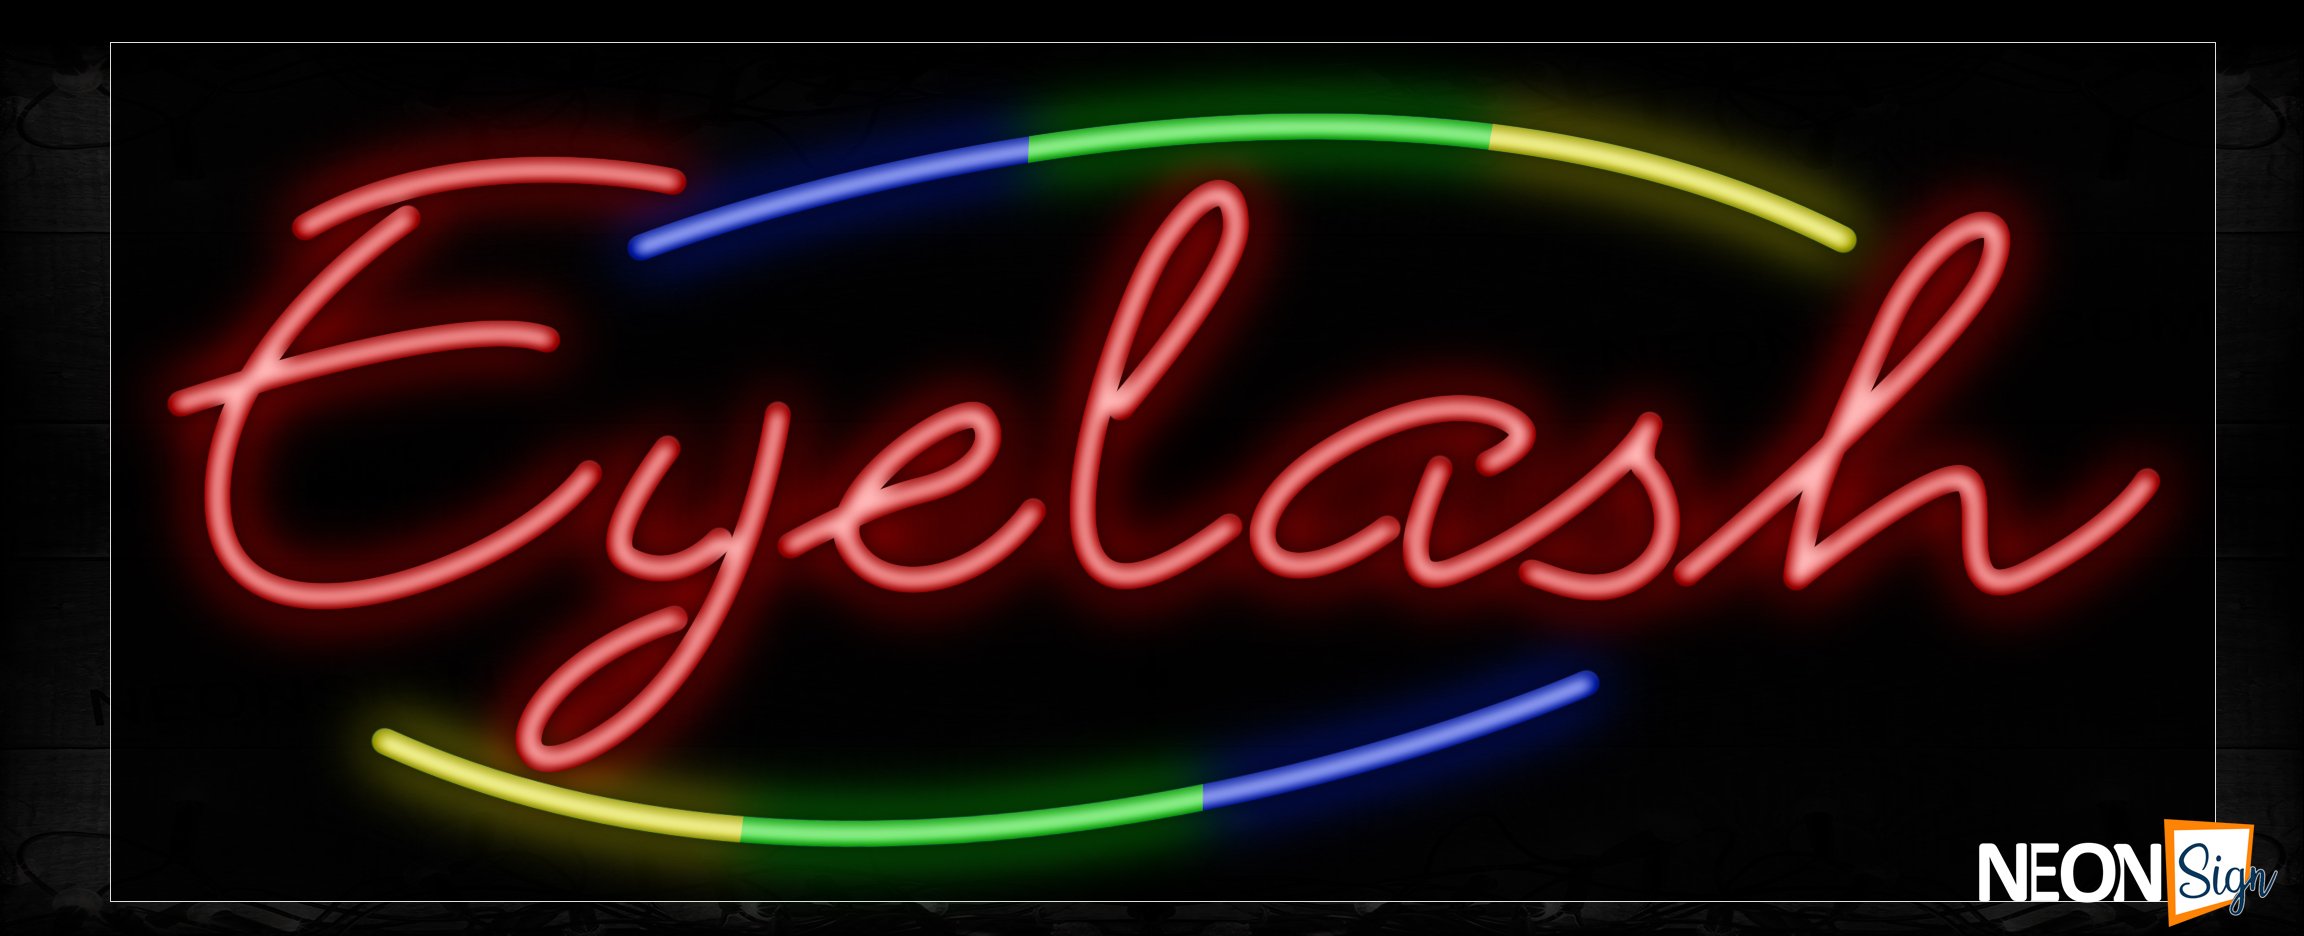 Image of Eyelash With Colorful Arc Border Neon Sign